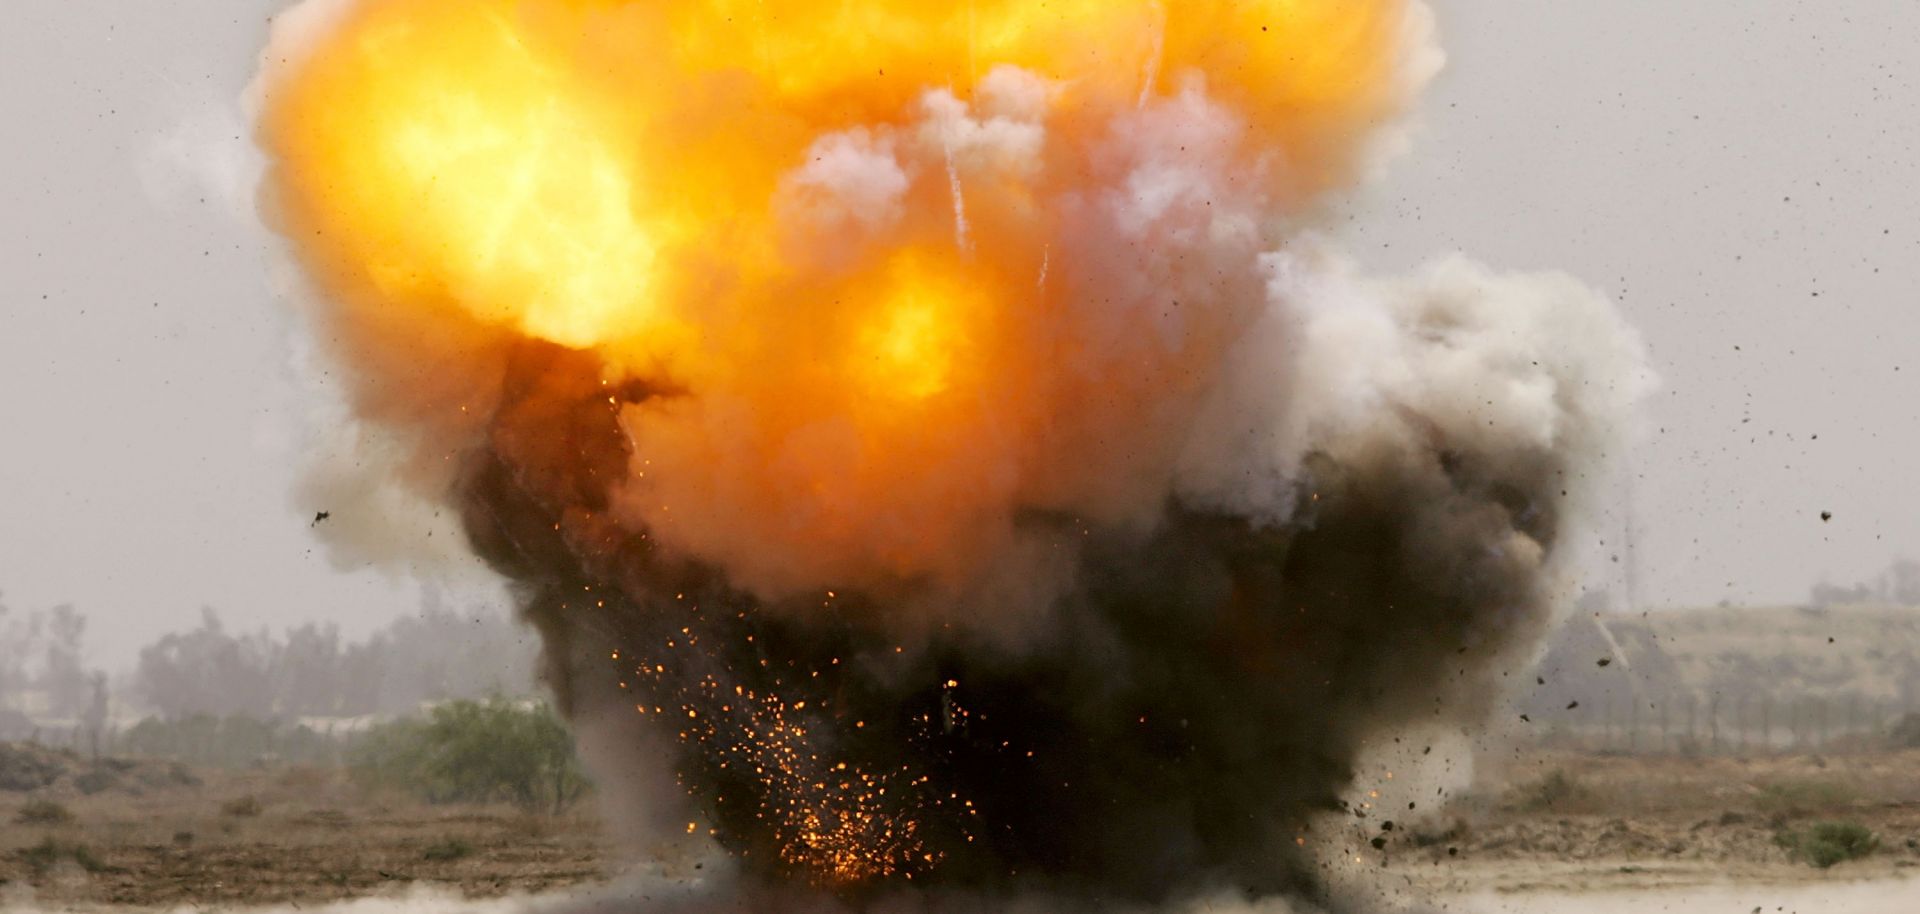 An improvised explosive device explodes next to a road.